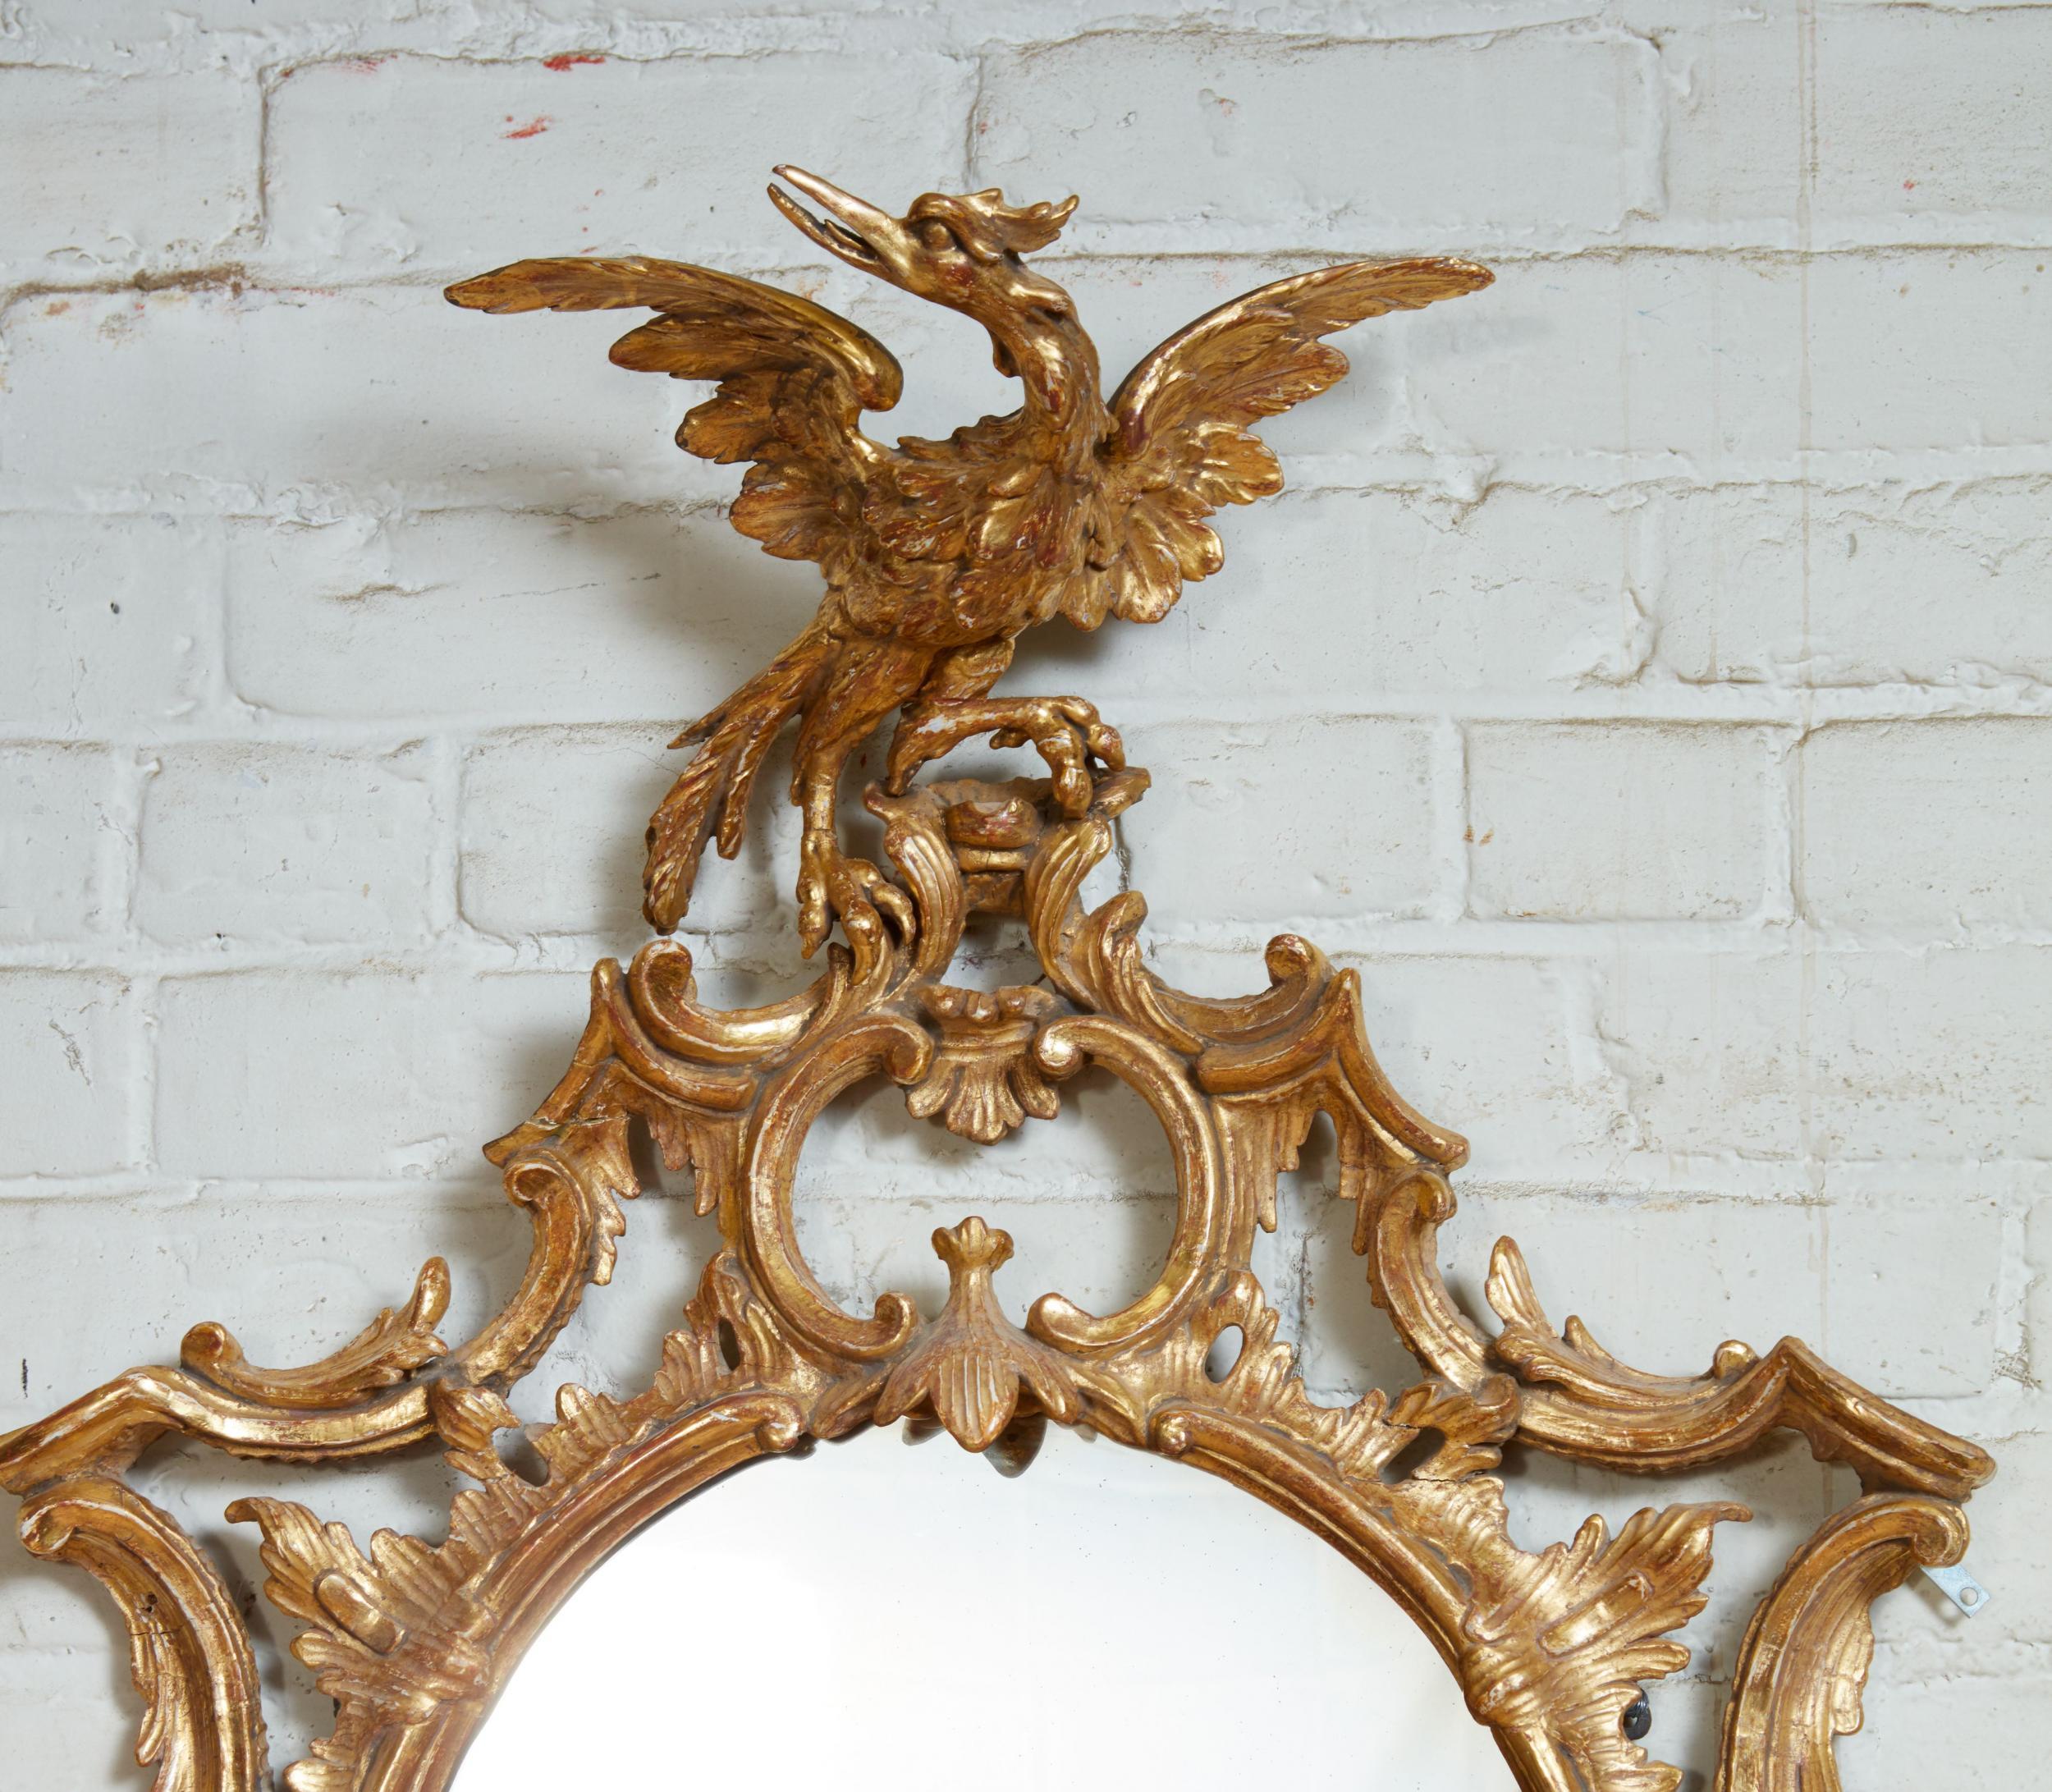 Fire George III period oval giltwood mirror, having phoenix carved crest over rococo scroll and foliate carving, the mercury glass oval plate crowned with naturalistic pagoda hood and flanked by elongated 